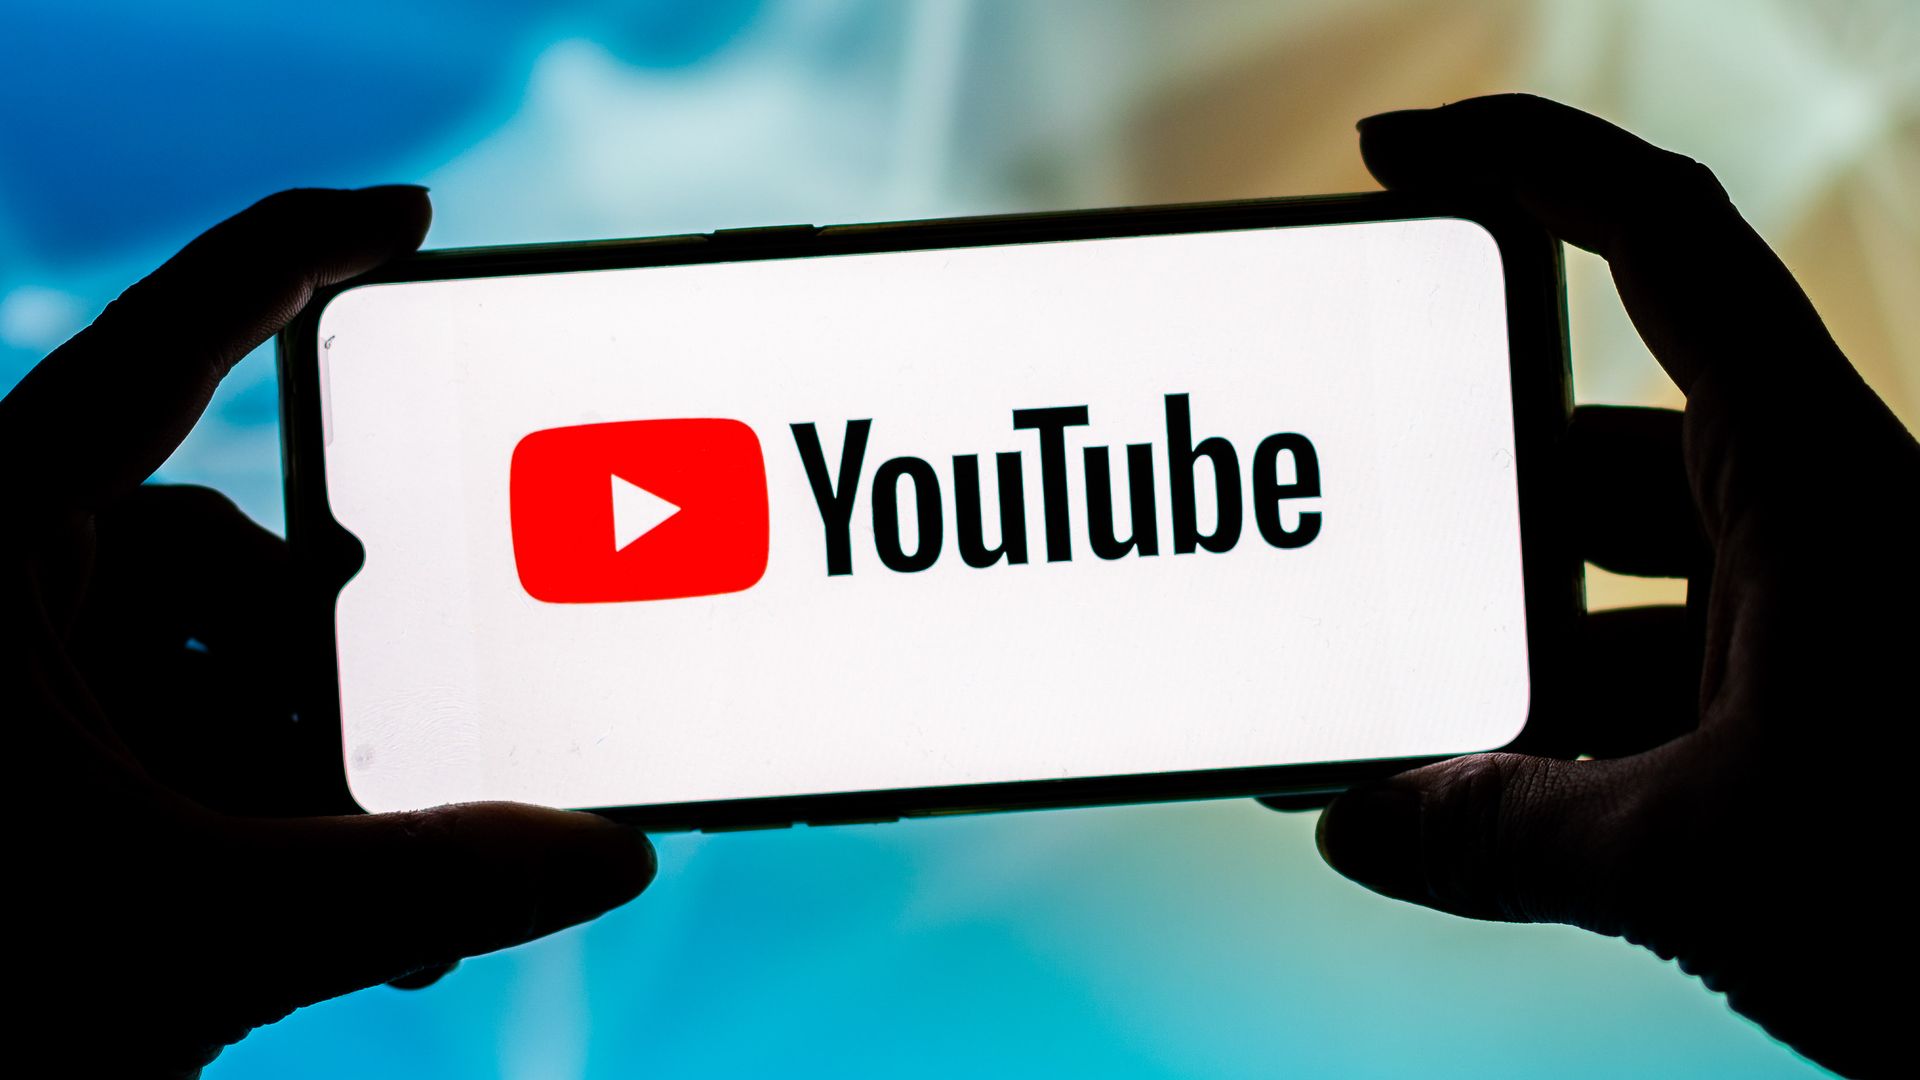 The YouTube logo is shown on a mobile phone